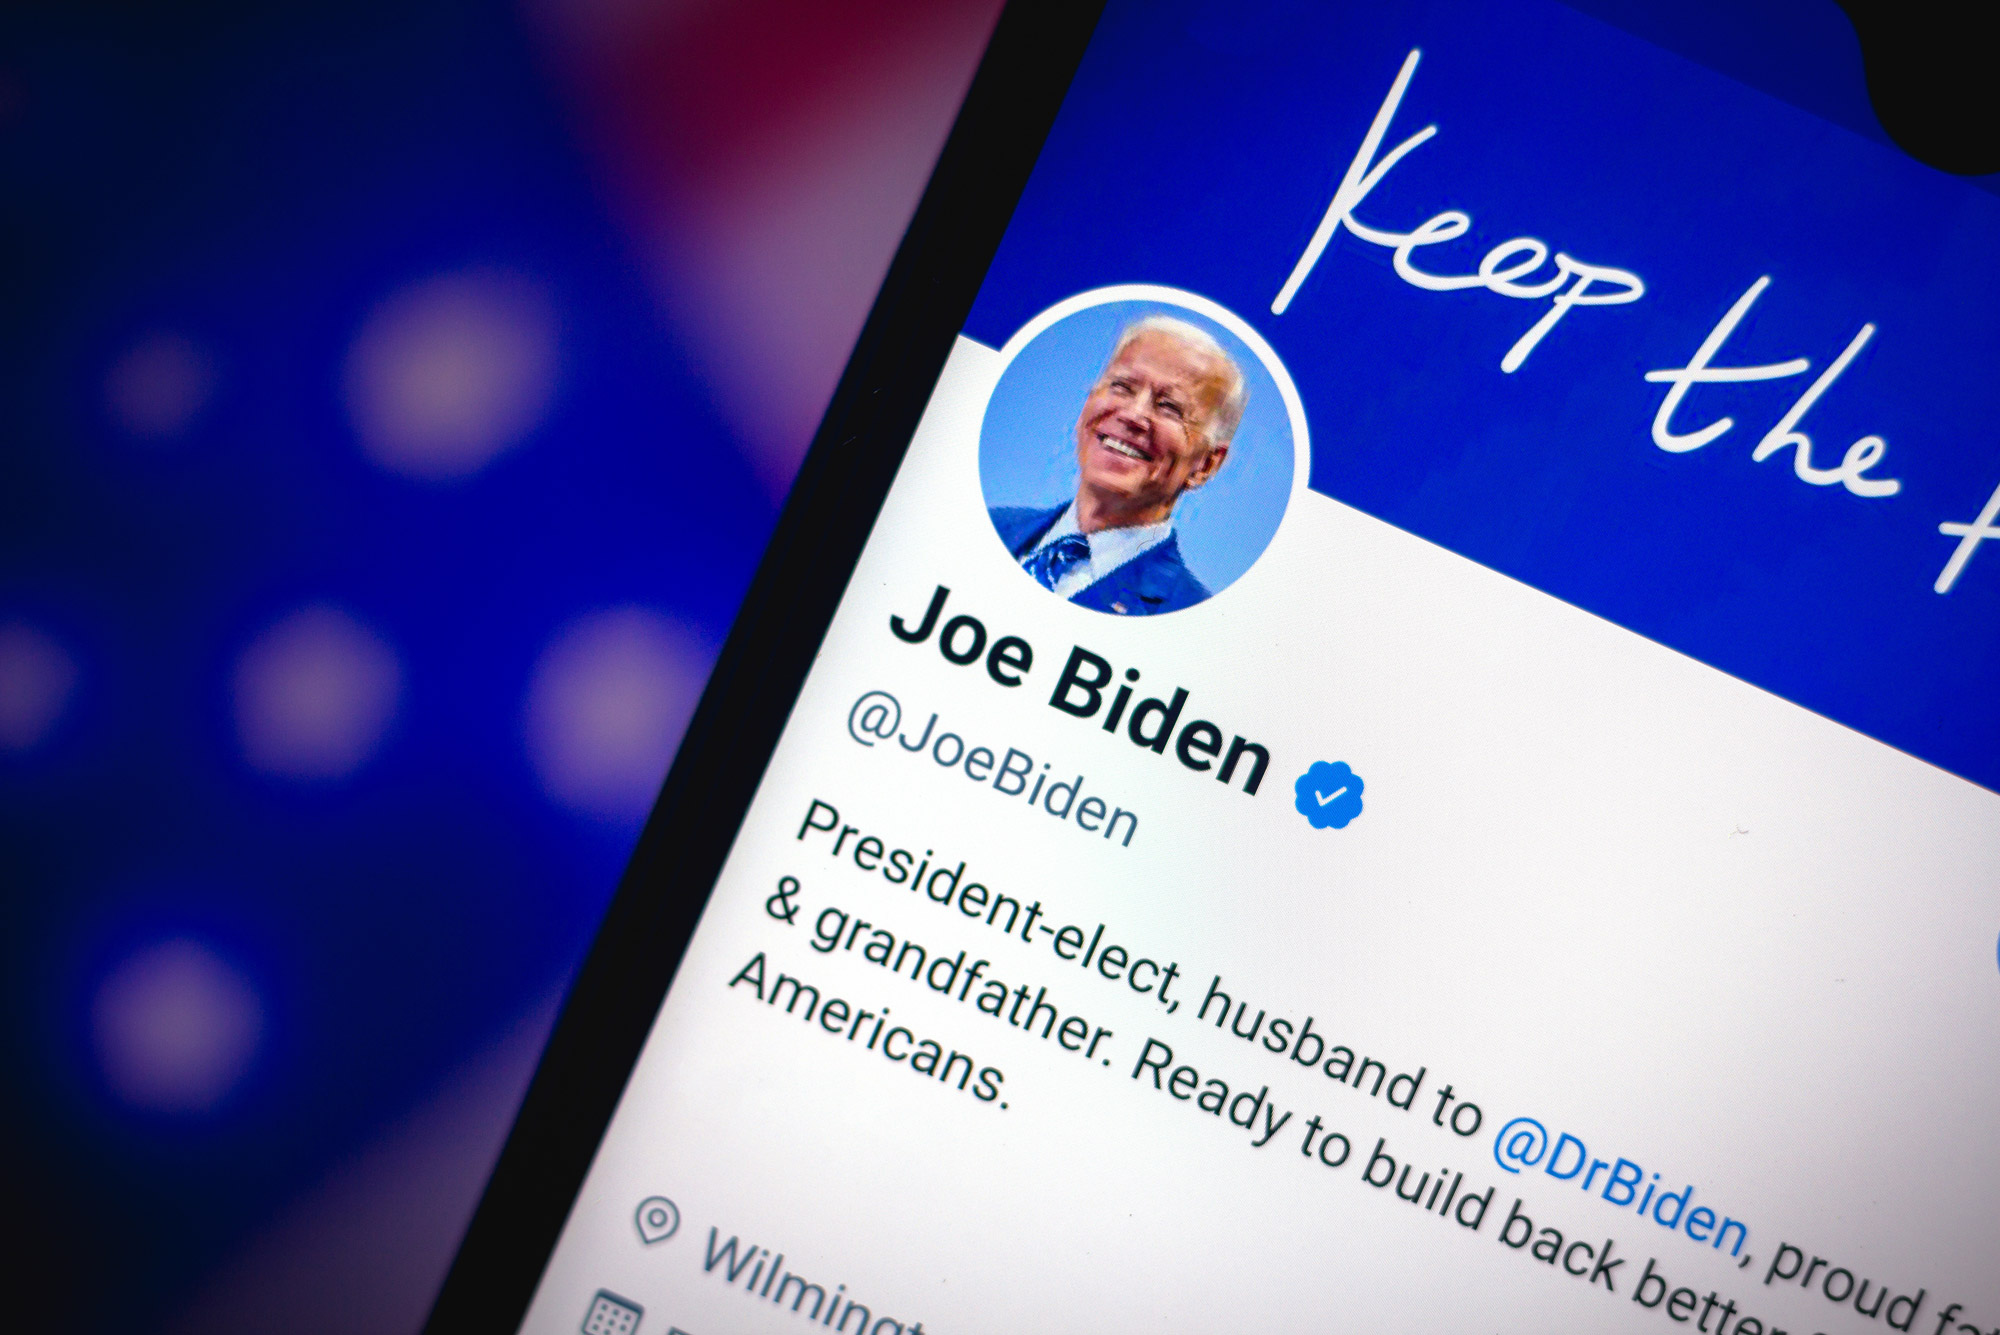 A photo of Joe Biden's twitter account displayed on the screen of a smart phone. The phone is held in front of an American flag.